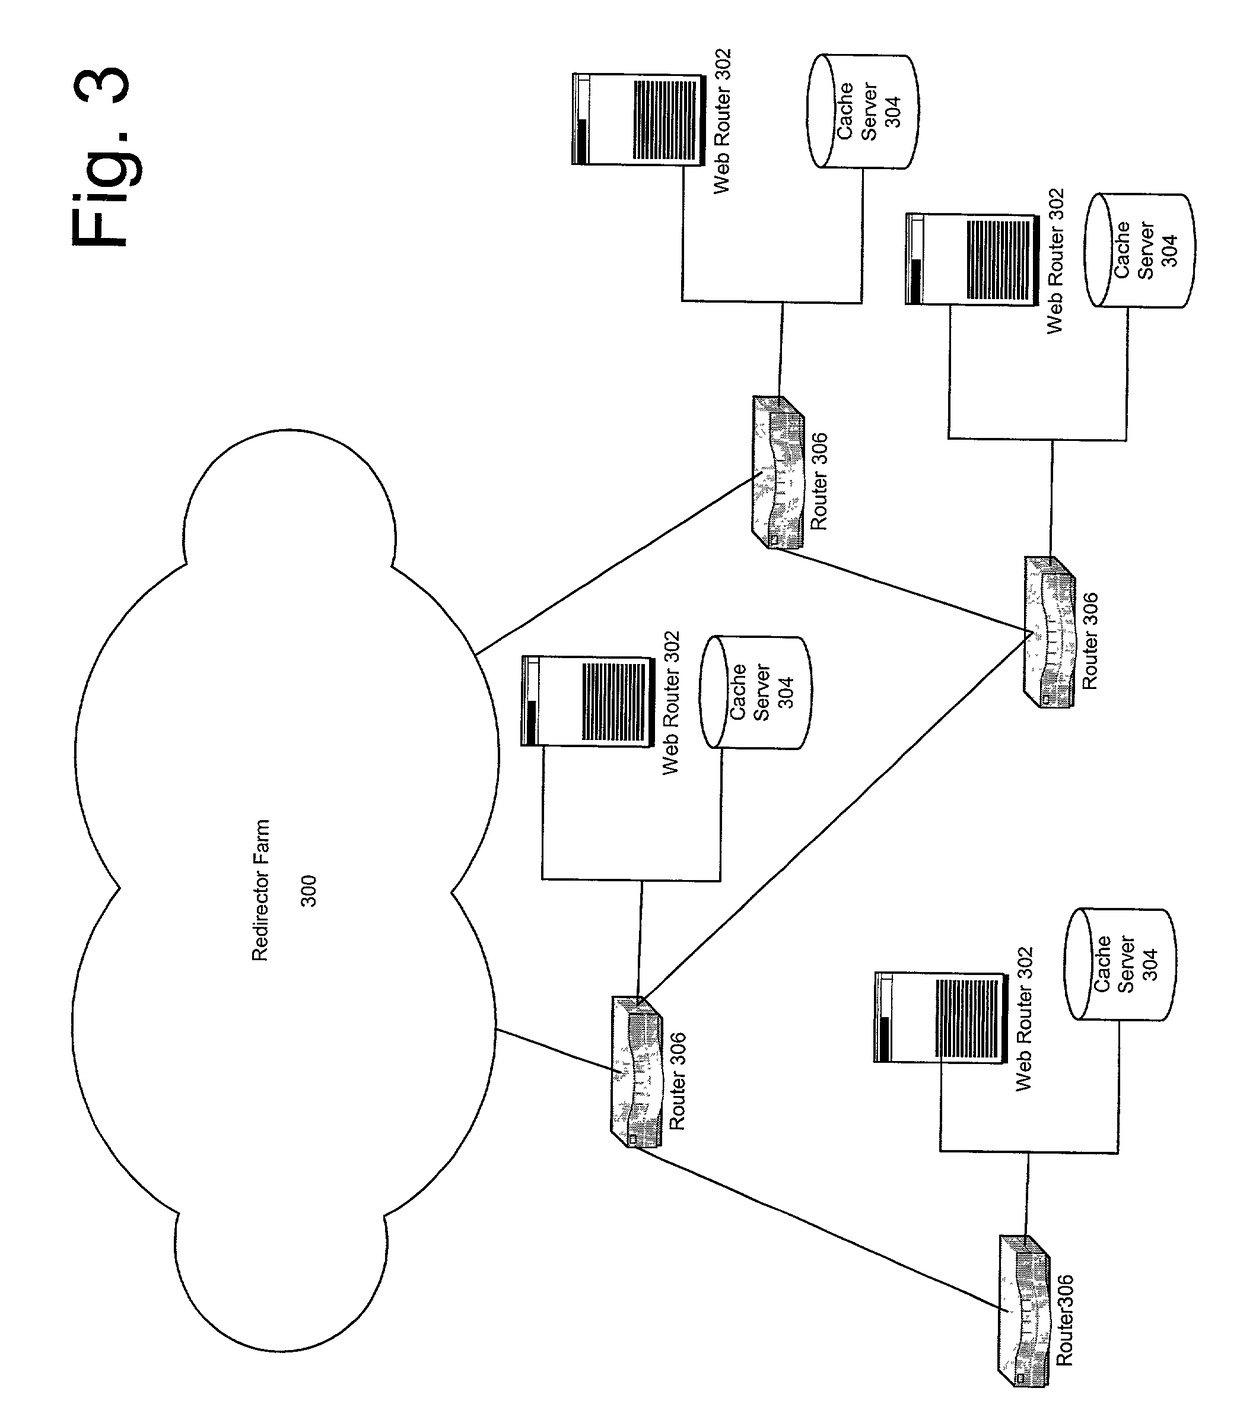 System and method for using network layer uniform resource locator routing to locate the closest server carrying specific content